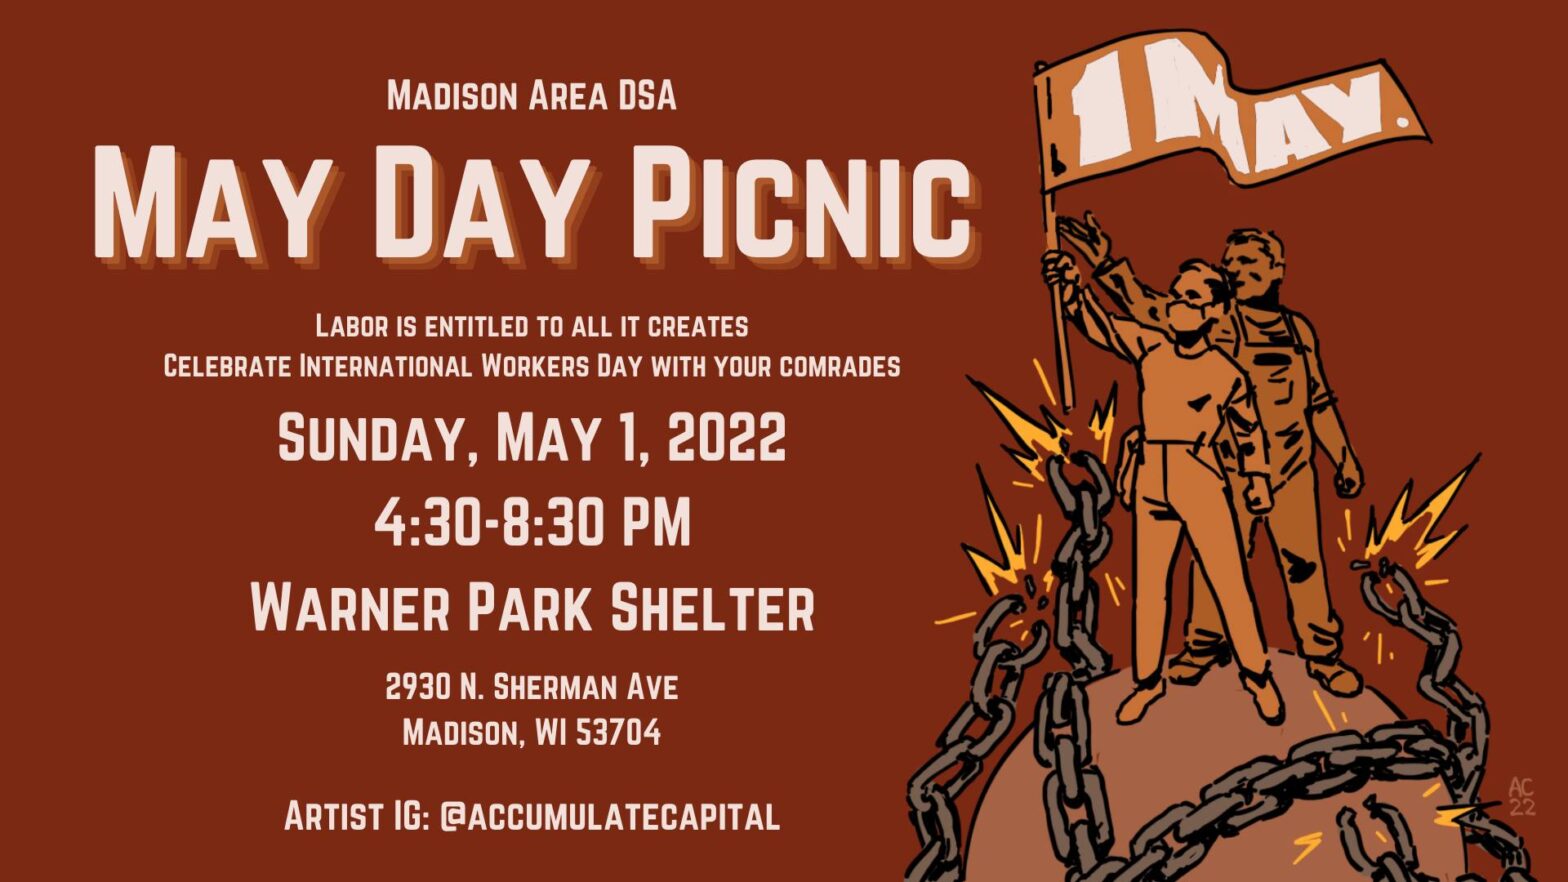 May Day in Madison: CUNA Picket & DSA Picnic